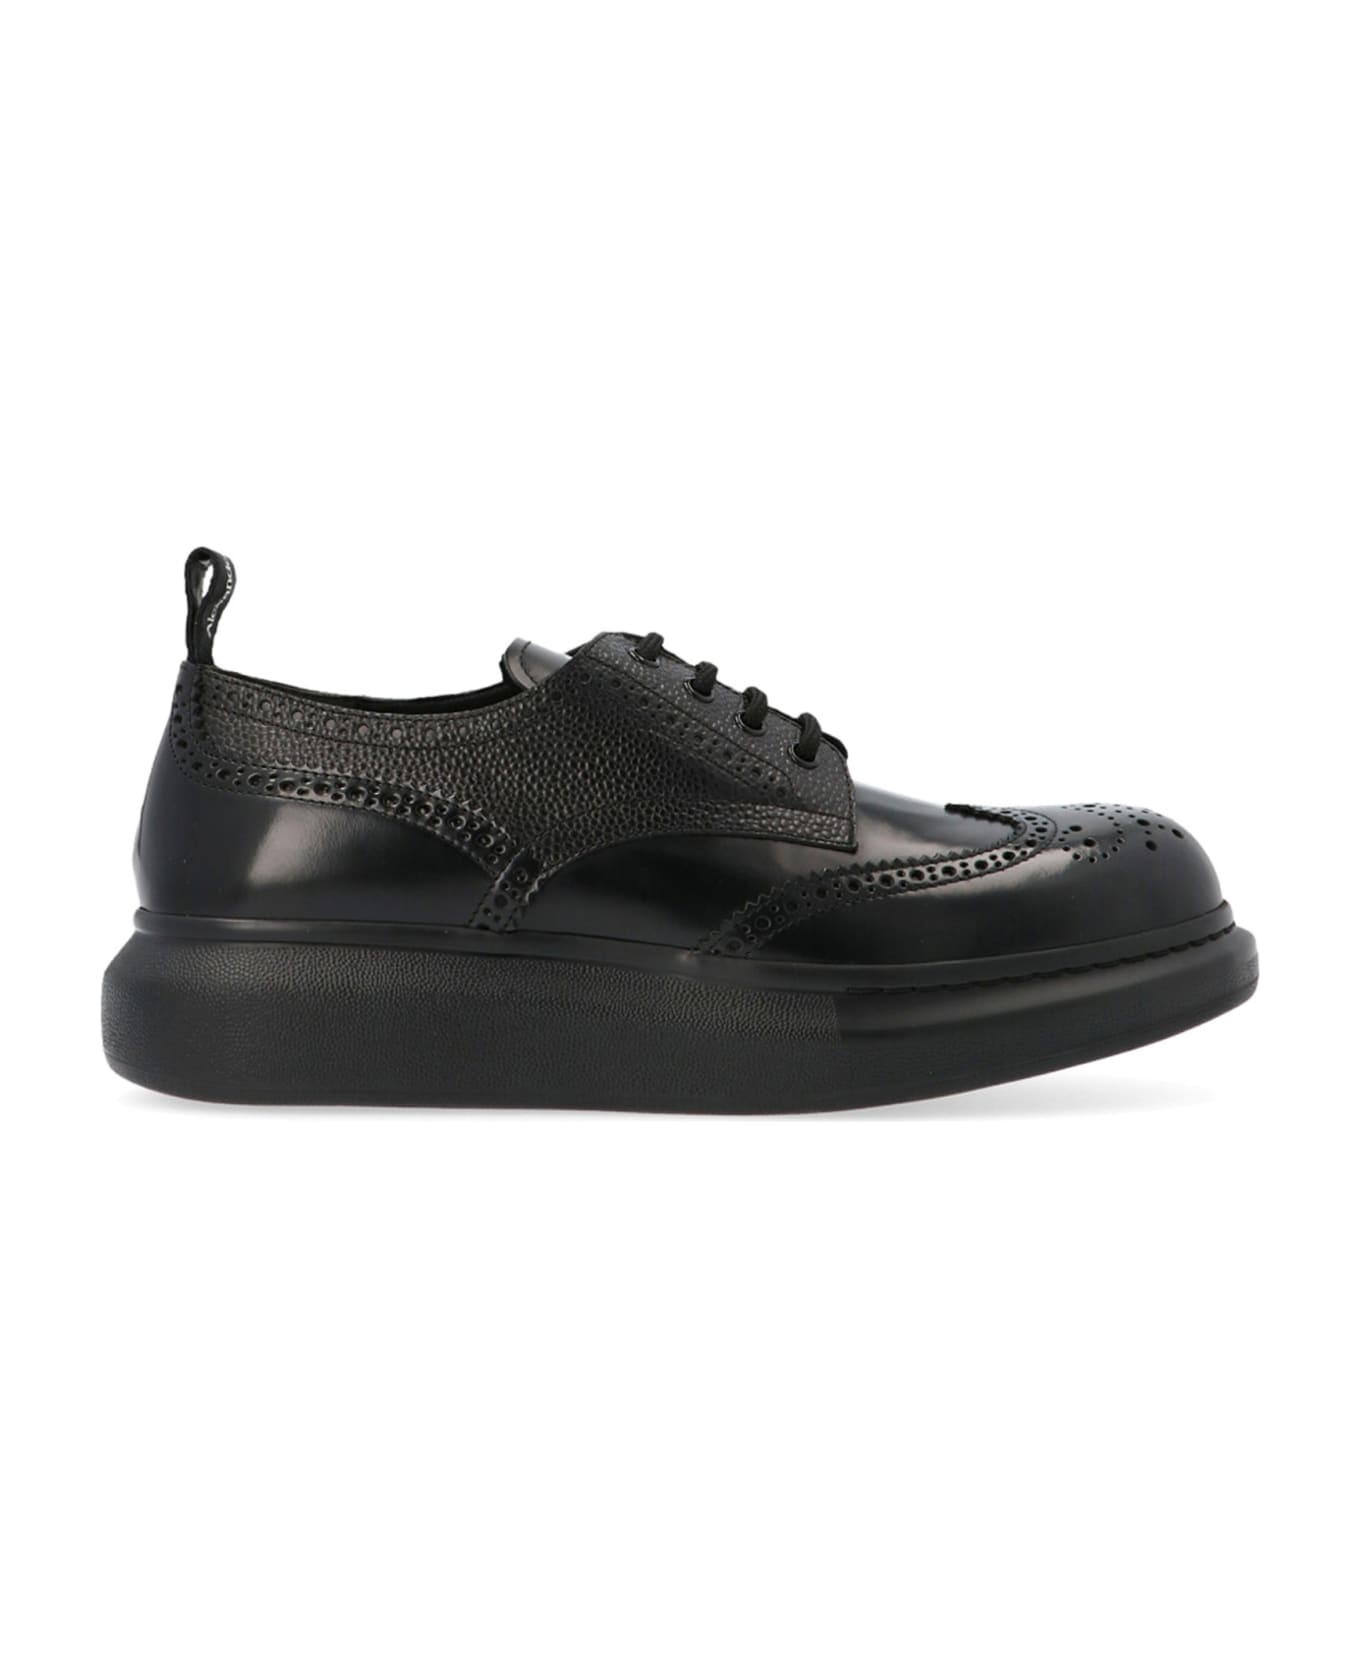 Alexander McQueen Hybrid Lace Up Shoes - Black